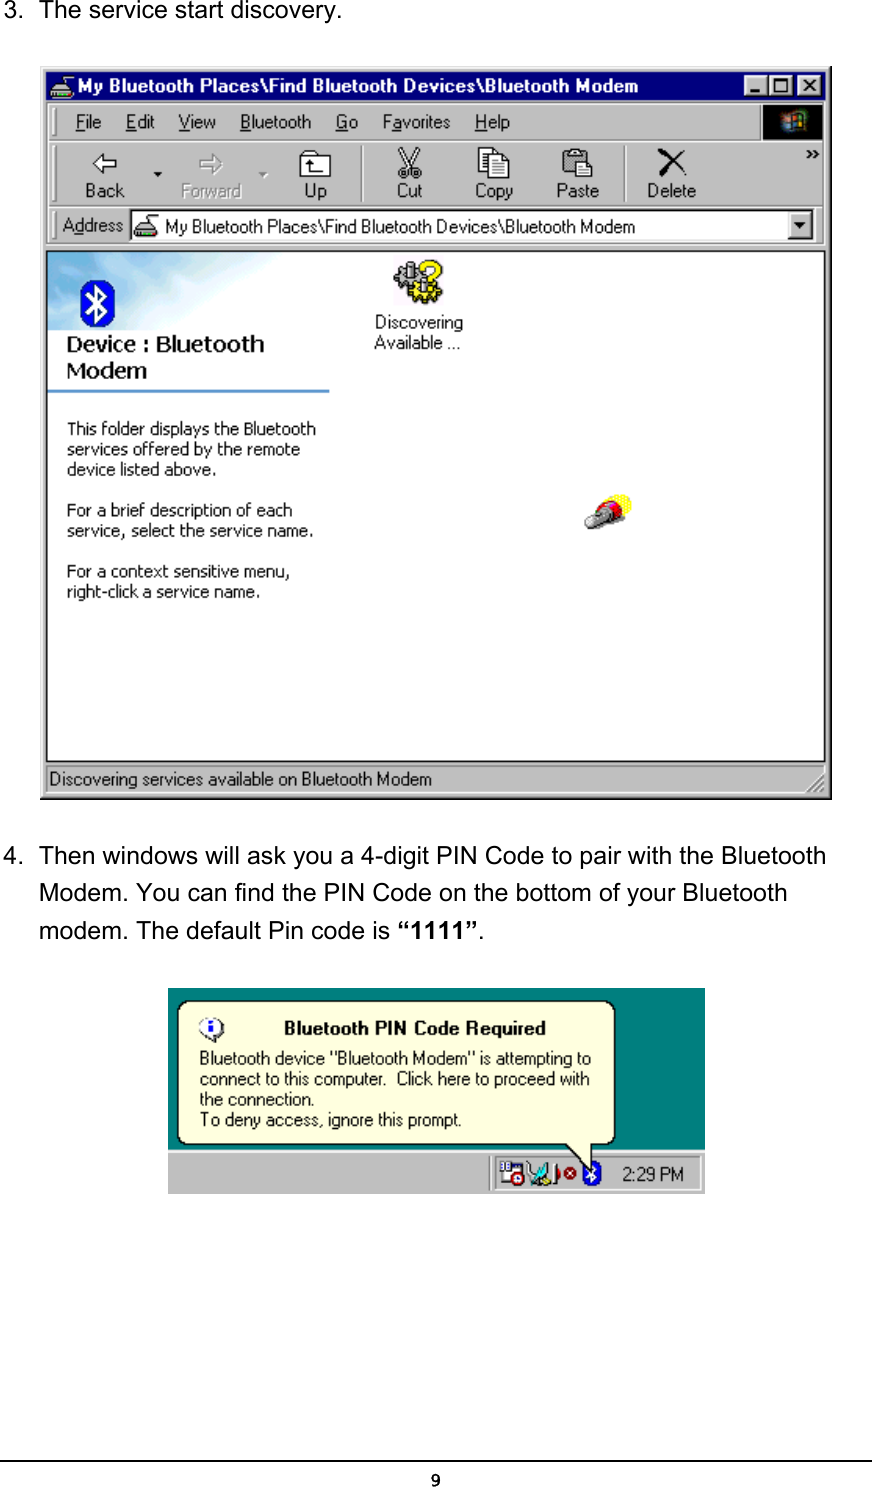   93.  The service start discovery.  4.  Then windows will ask you a 4-digit PIN Code to pair with the Bluetooth Modem. You can find the PIN Code on the bottom of your Bluetooth modem. The default Pin code is “1111”.  